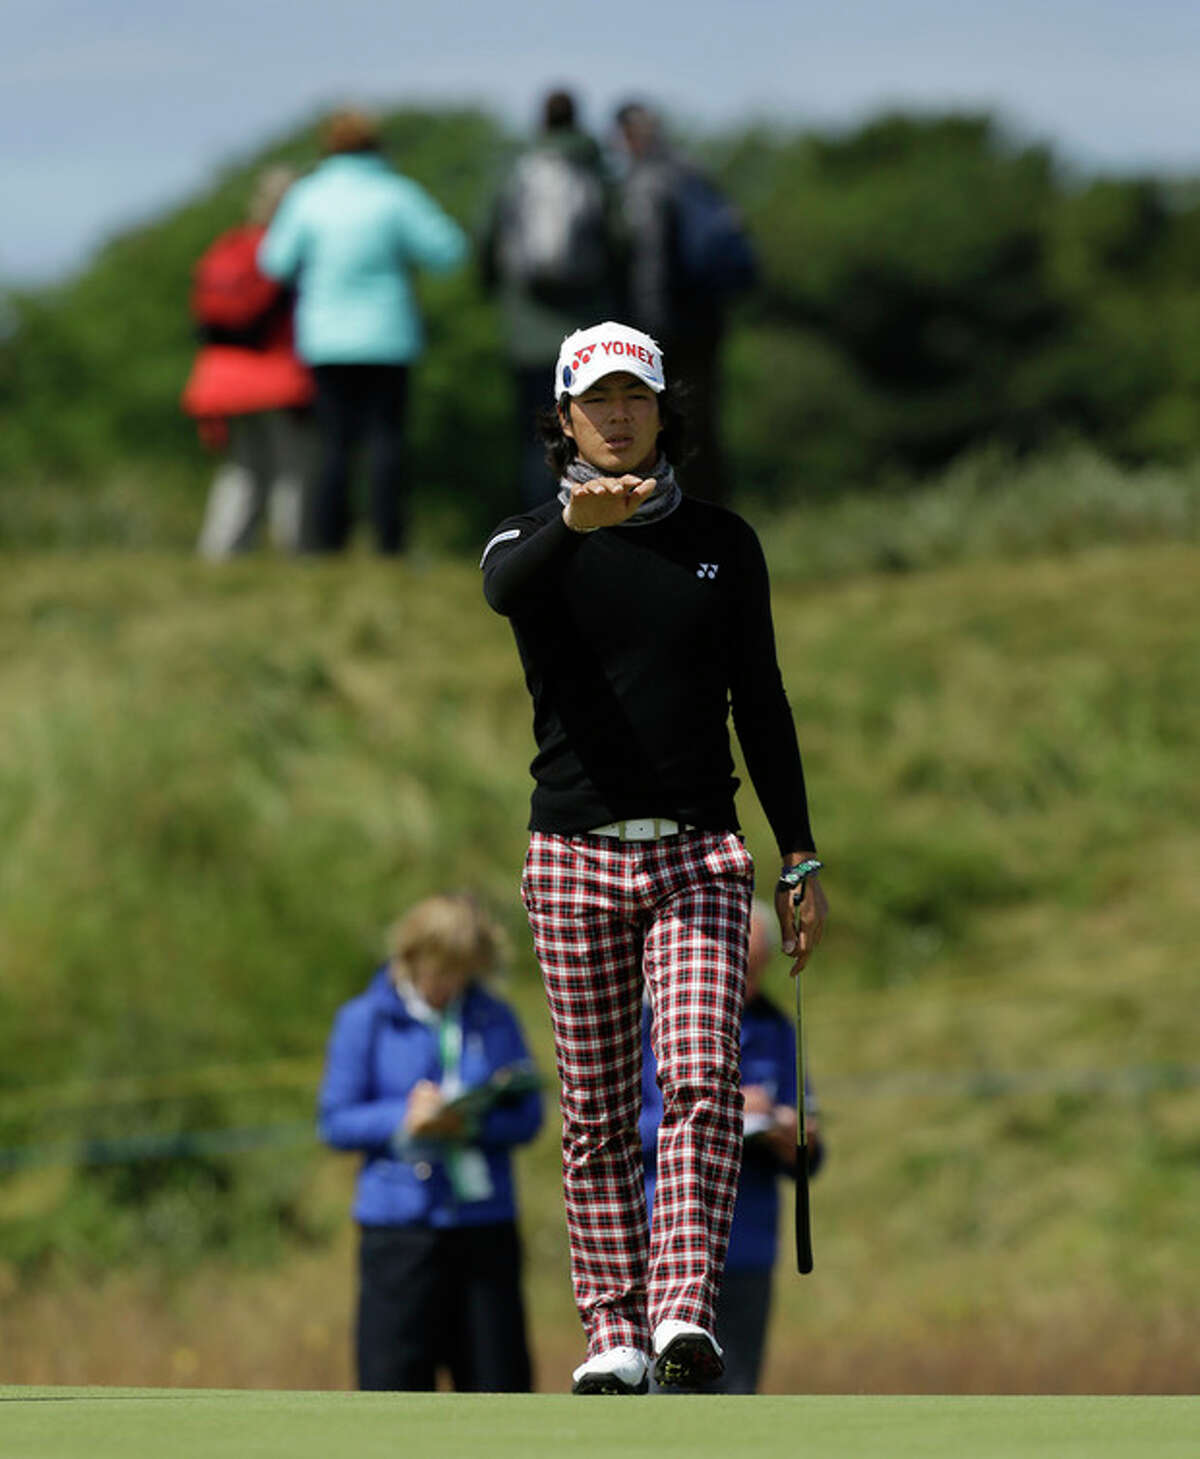 Ryo Ishikawa of Japan reacts after putting on the sixth green during a practice round at Royal Lytham & St Annes golf club ahead of the British Open Golf Championship, Lytham St Annes, England, Wednesday, July 18, 2012. (AP Photo/Jon Super)